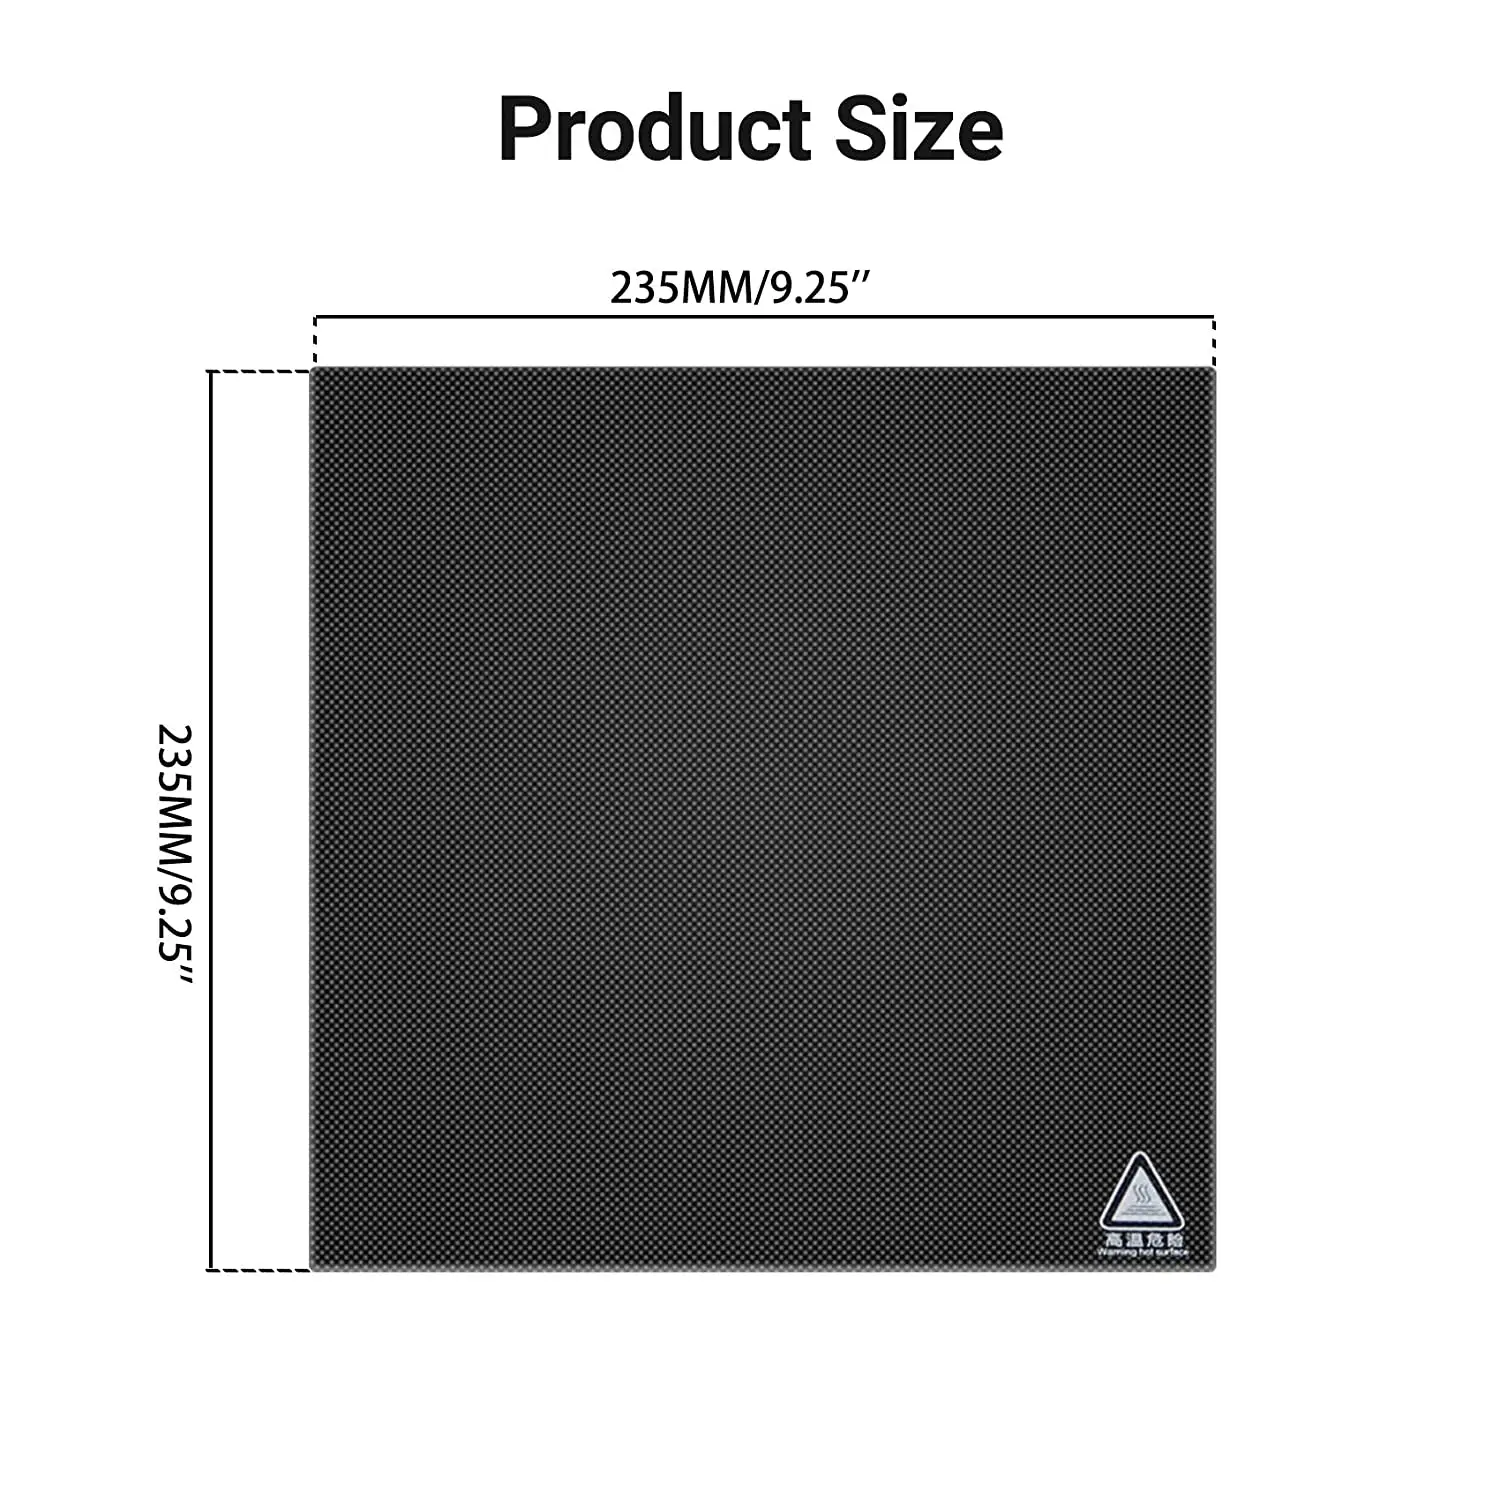 TENLOG Upgrade 3D Printer Borosilicate Glass Bed for Creality CR-10 TL-D3 Pro Glass Plate Build Surface 235 X 235 x 4mm loading=lazy